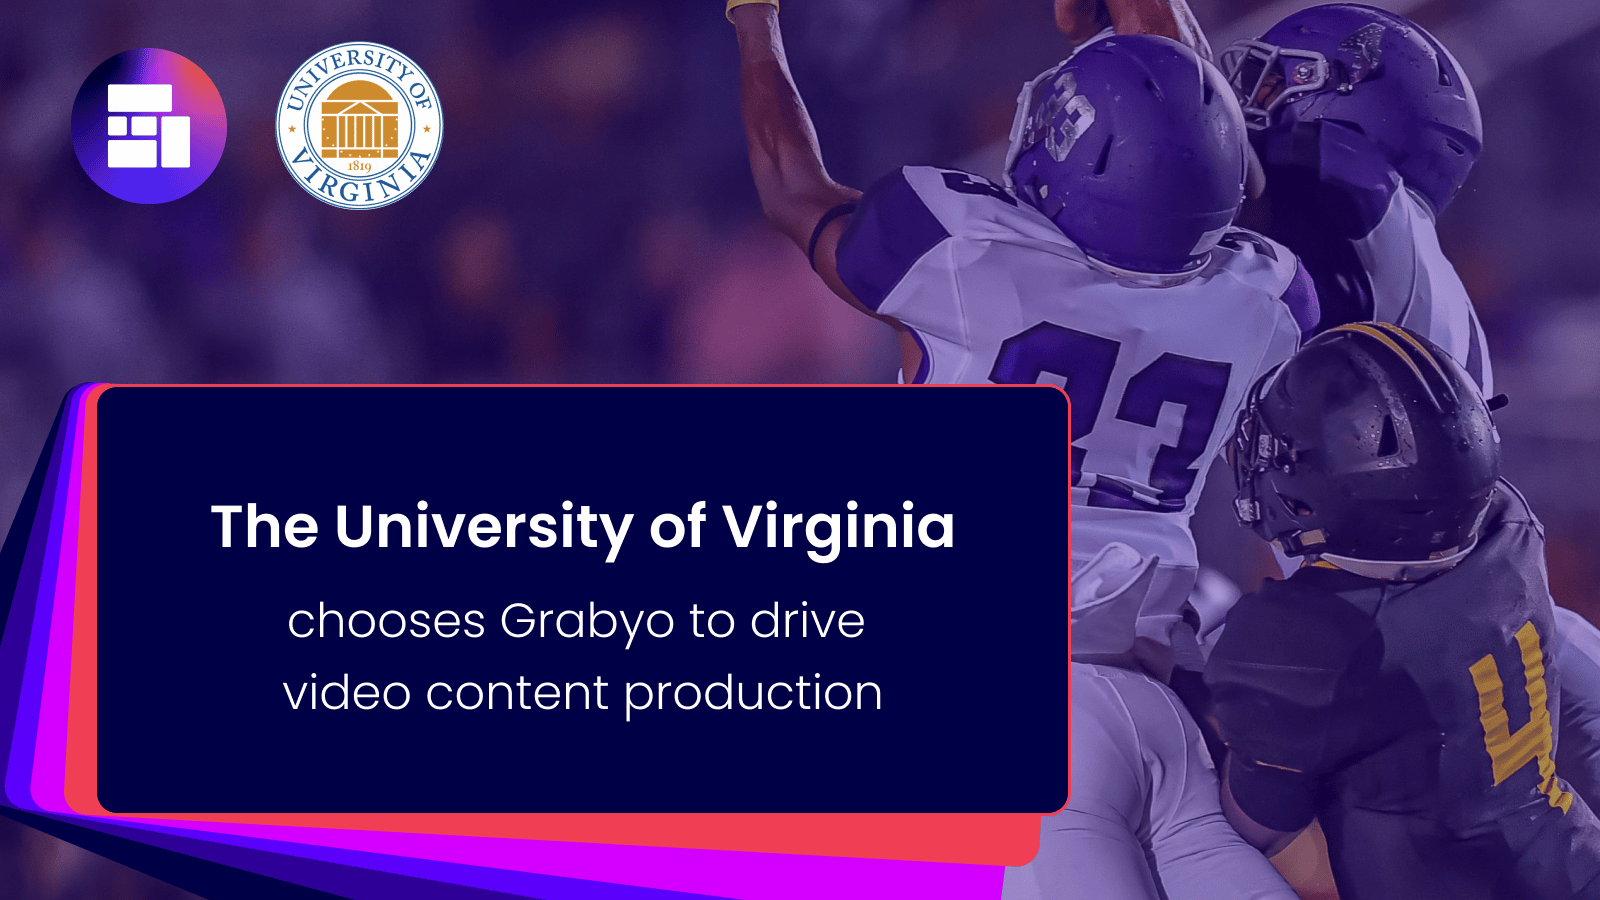 The University of Virginia choses Grabyo to drive video content production